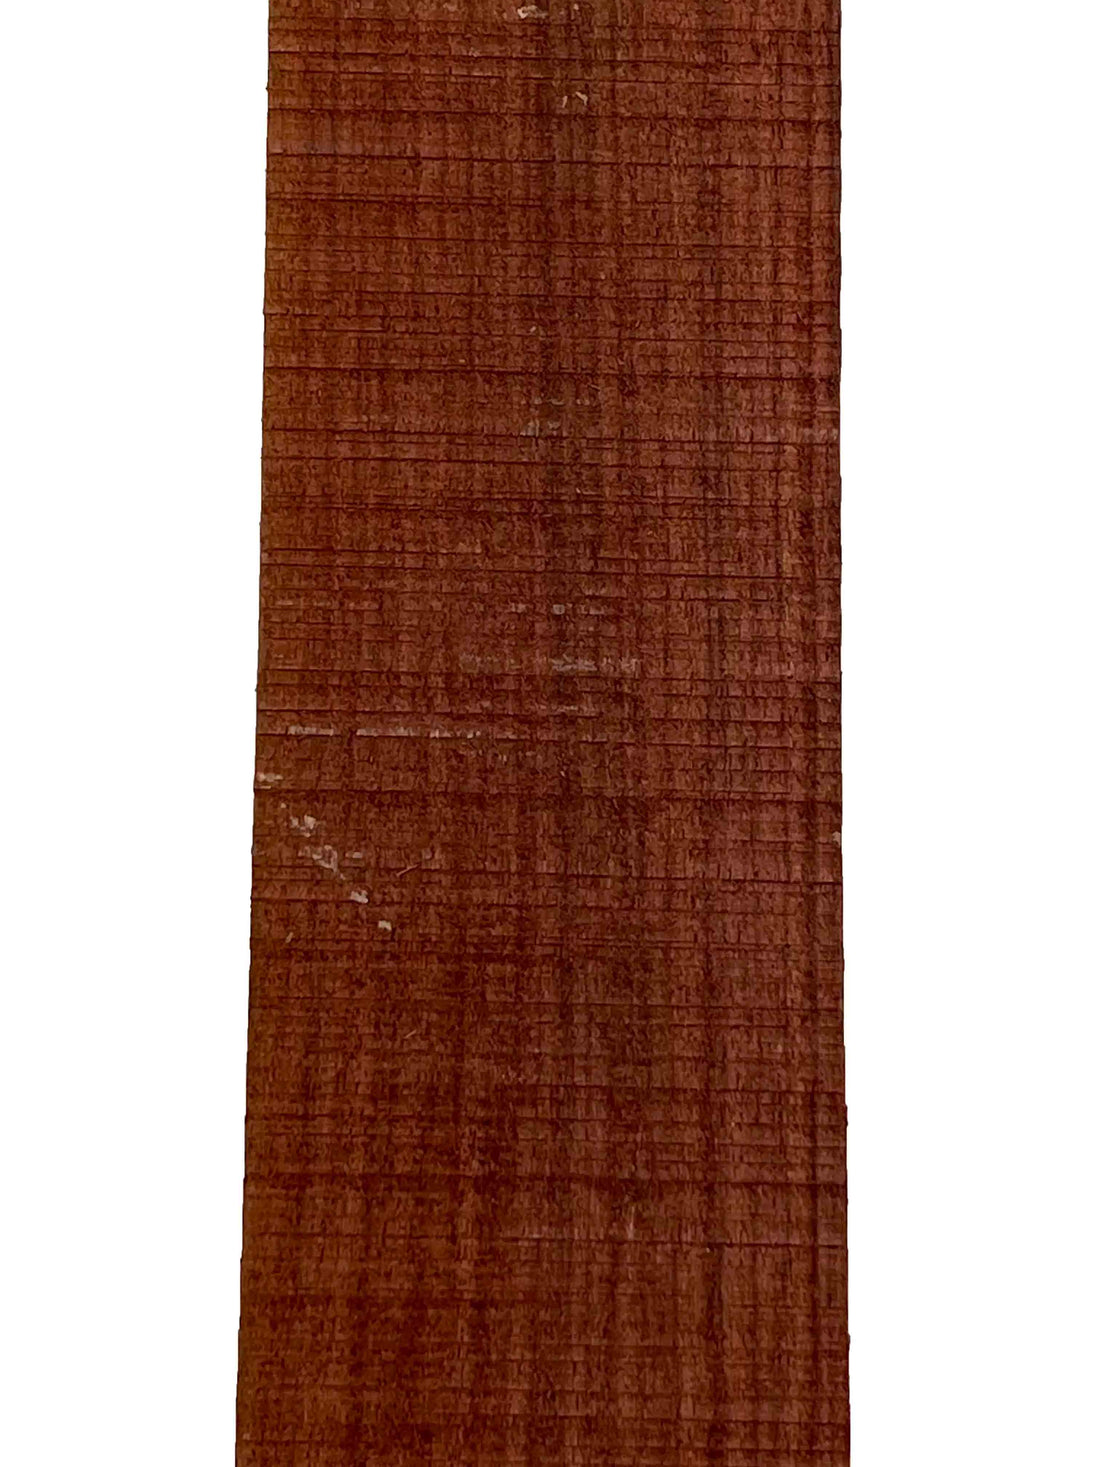 East Indian Rosewood Fingerboard - 21&quot; x 2-3/4&quot; x 3/8&quot; - Exotic Wood Zone - Buy online Across USA 